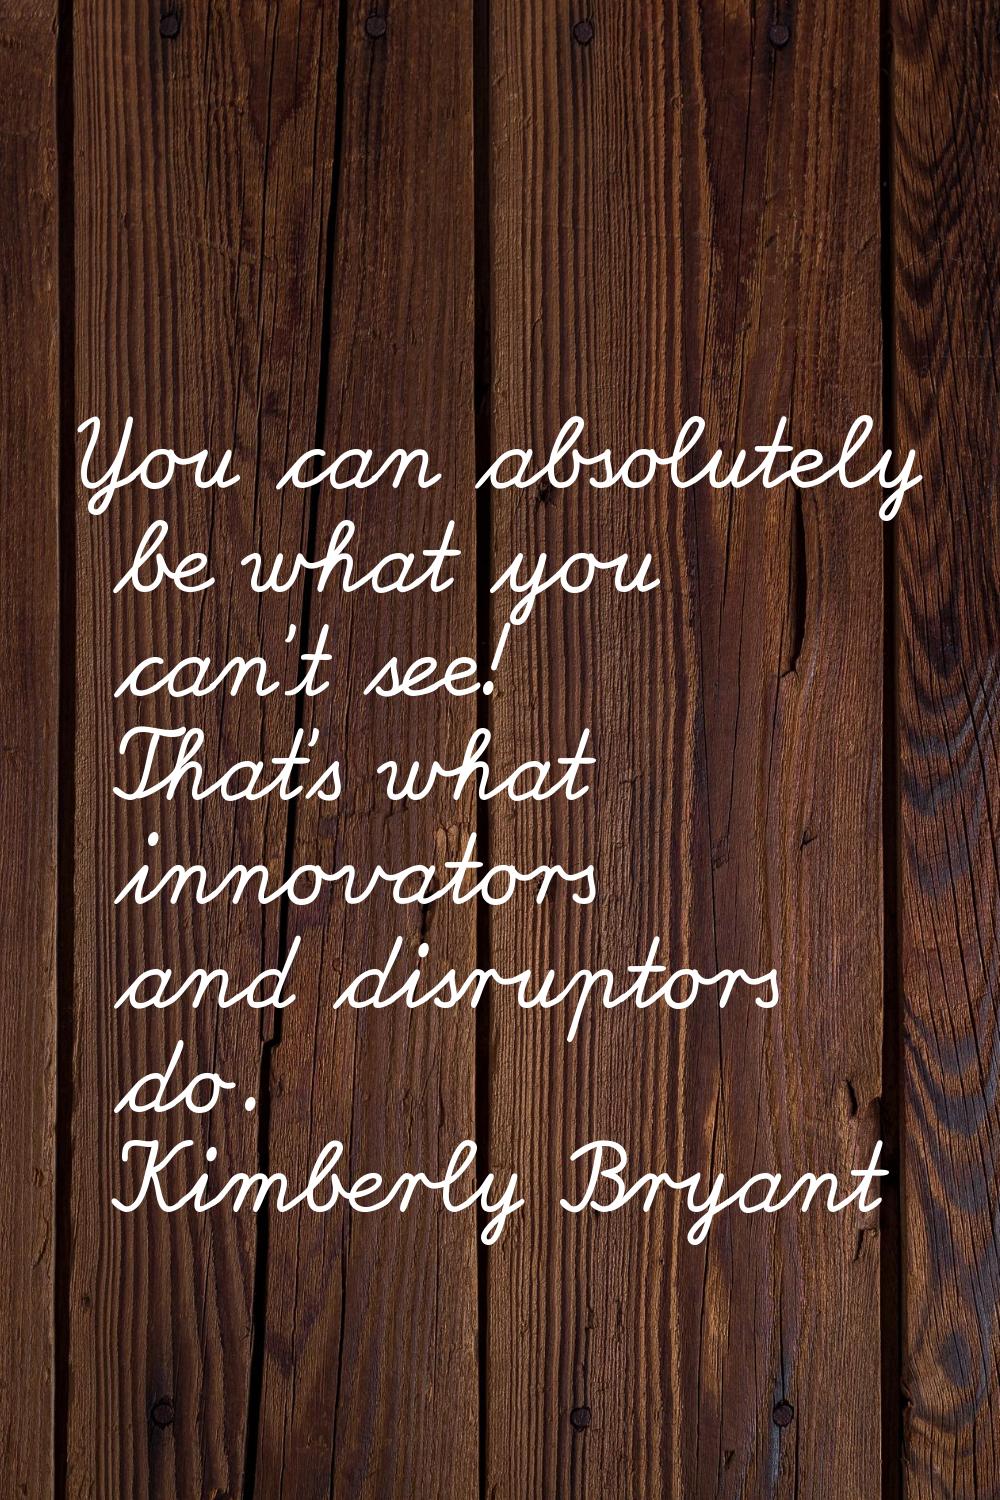 You can absolutely be what you can't see! That's what innovators and disruptors do.